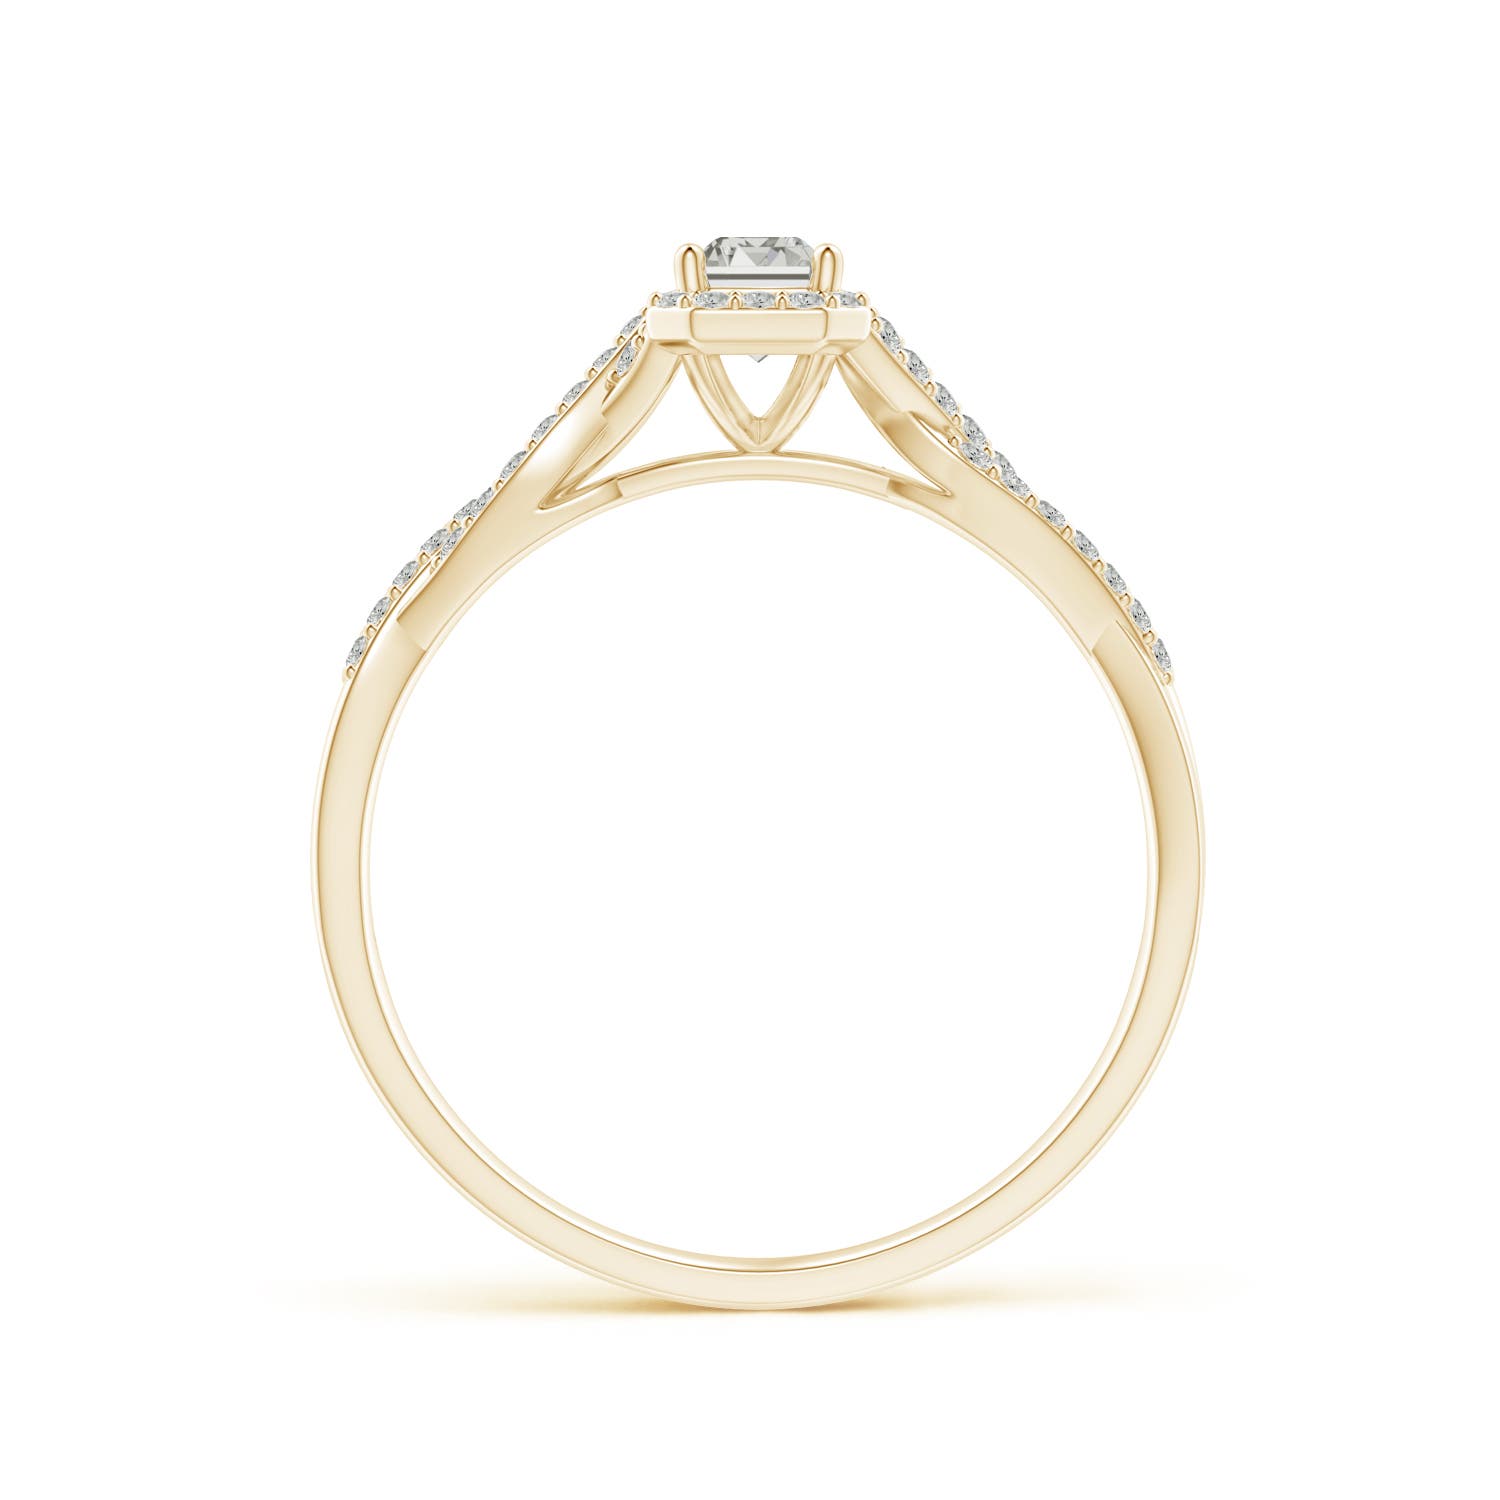 K, I3 / 0.49 CT / 14 KT Yellow Gold